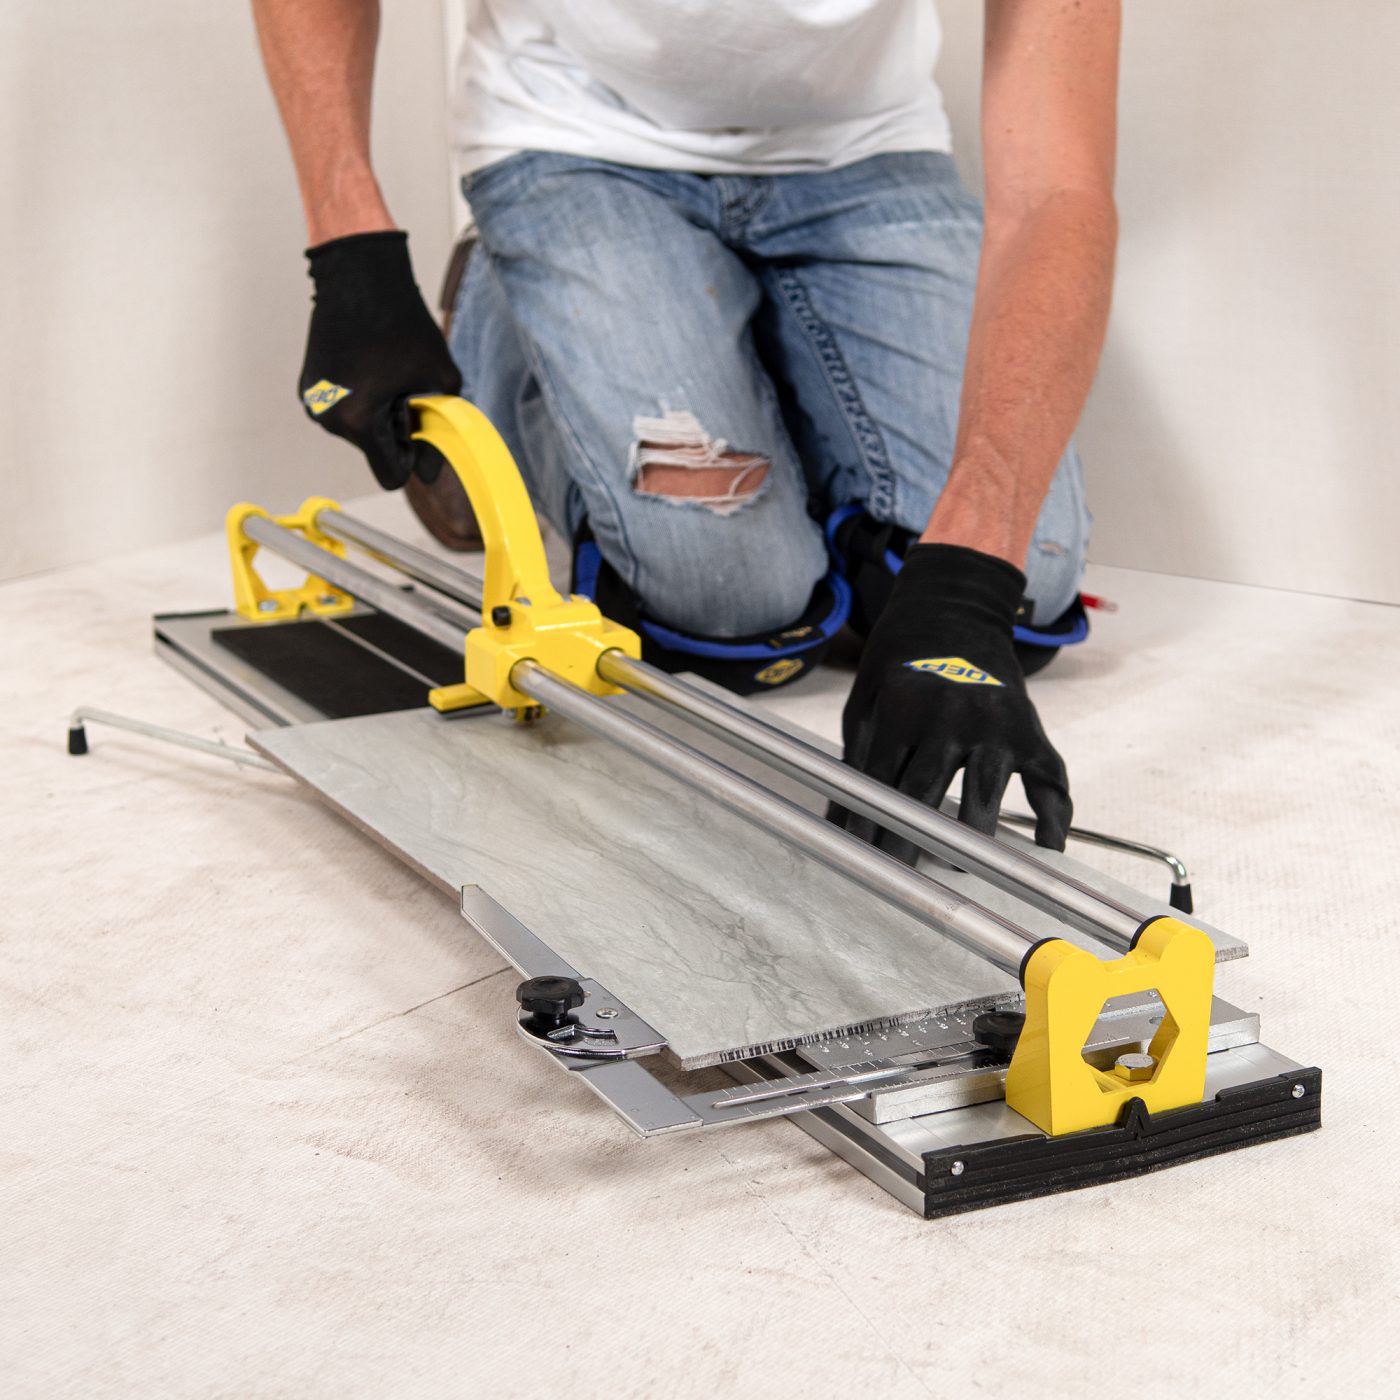 35" Professional Tile Cutter